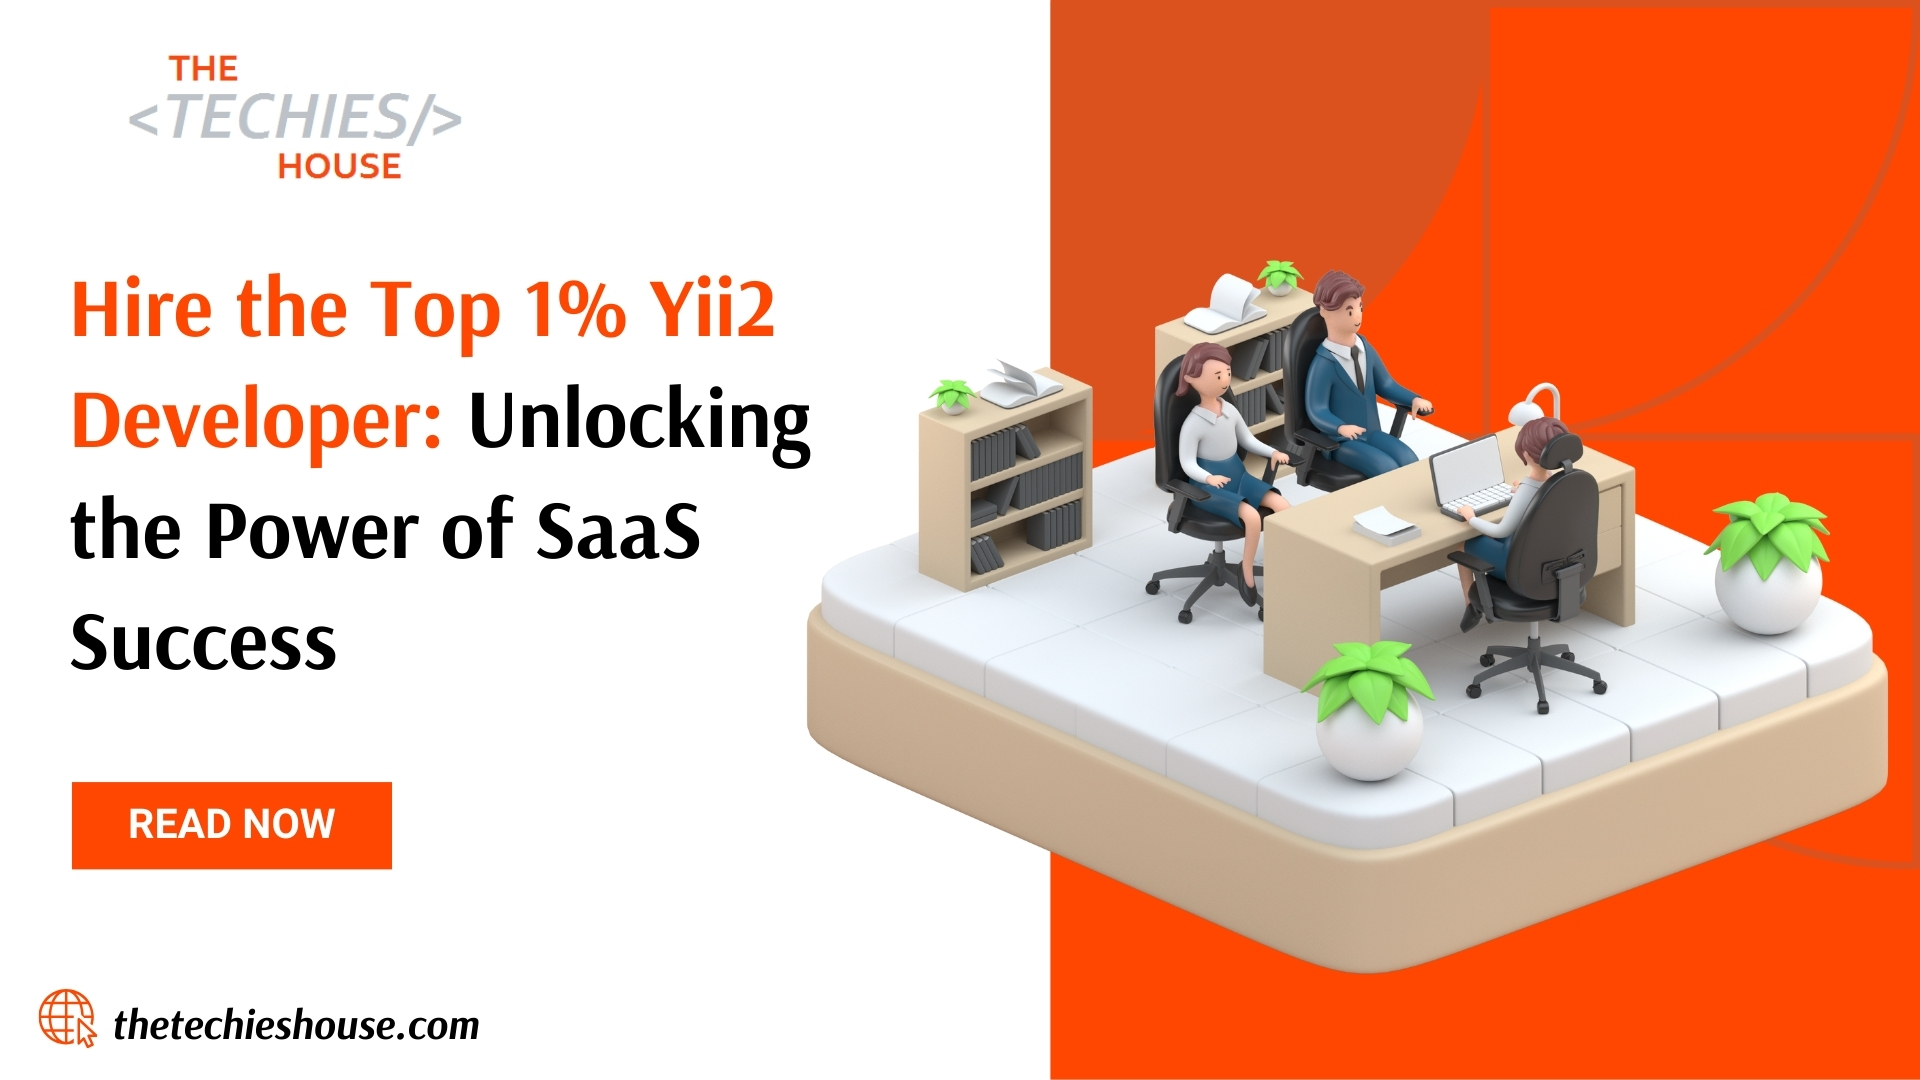 Hire the Top 1% Yii2 Developer: Unlocking the Power of SaaS Success